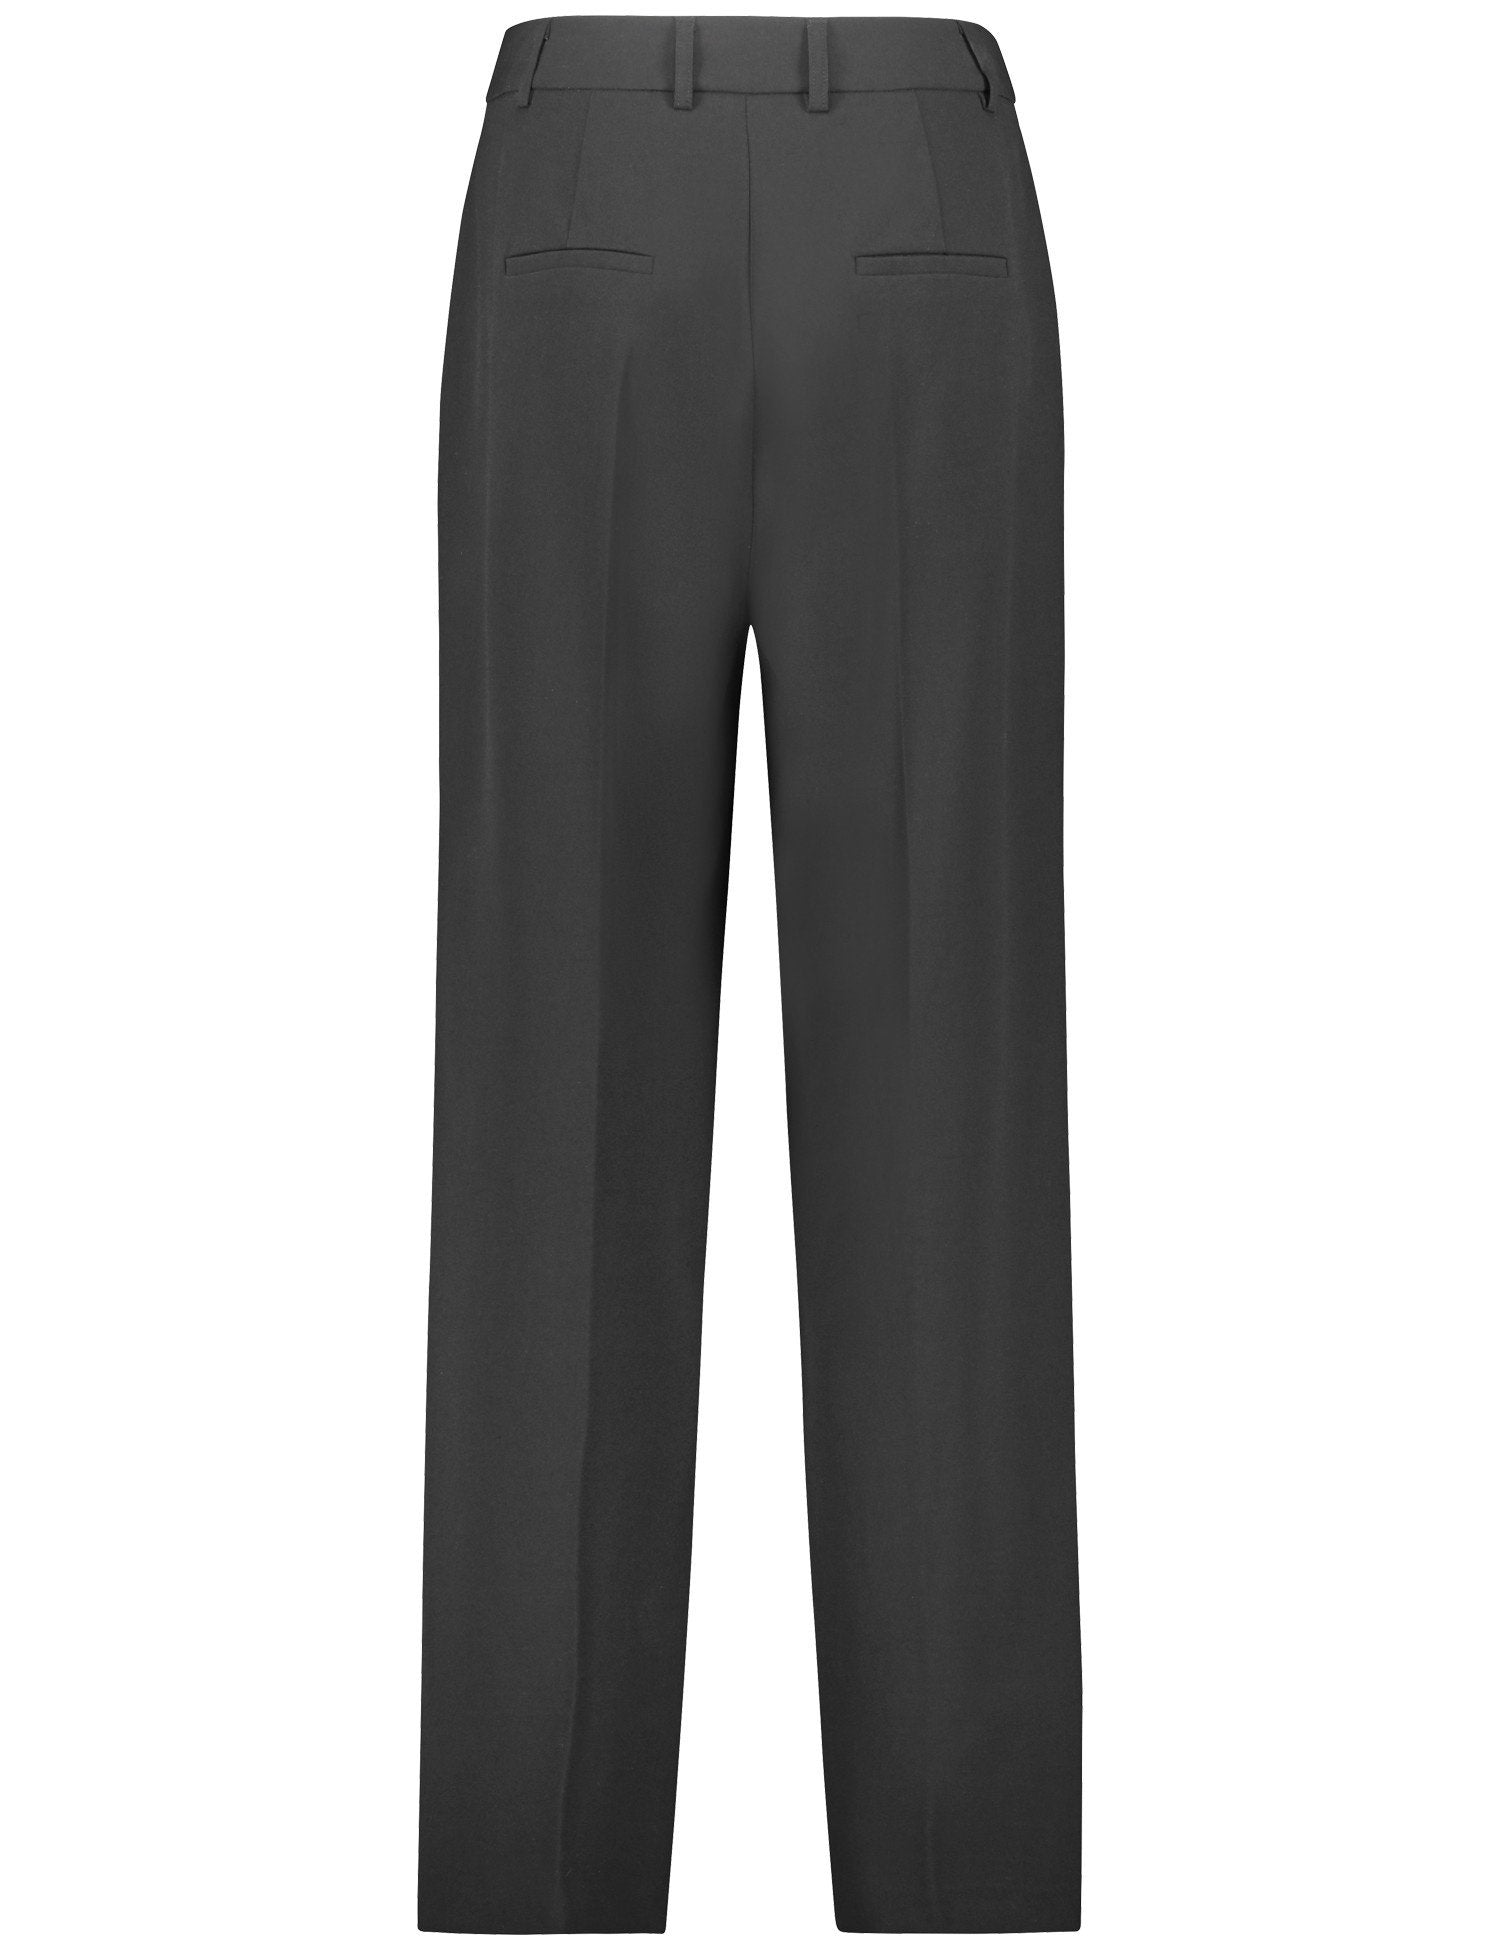 Elegant Trousers With A Wide Leg_920971-19800_1100_03